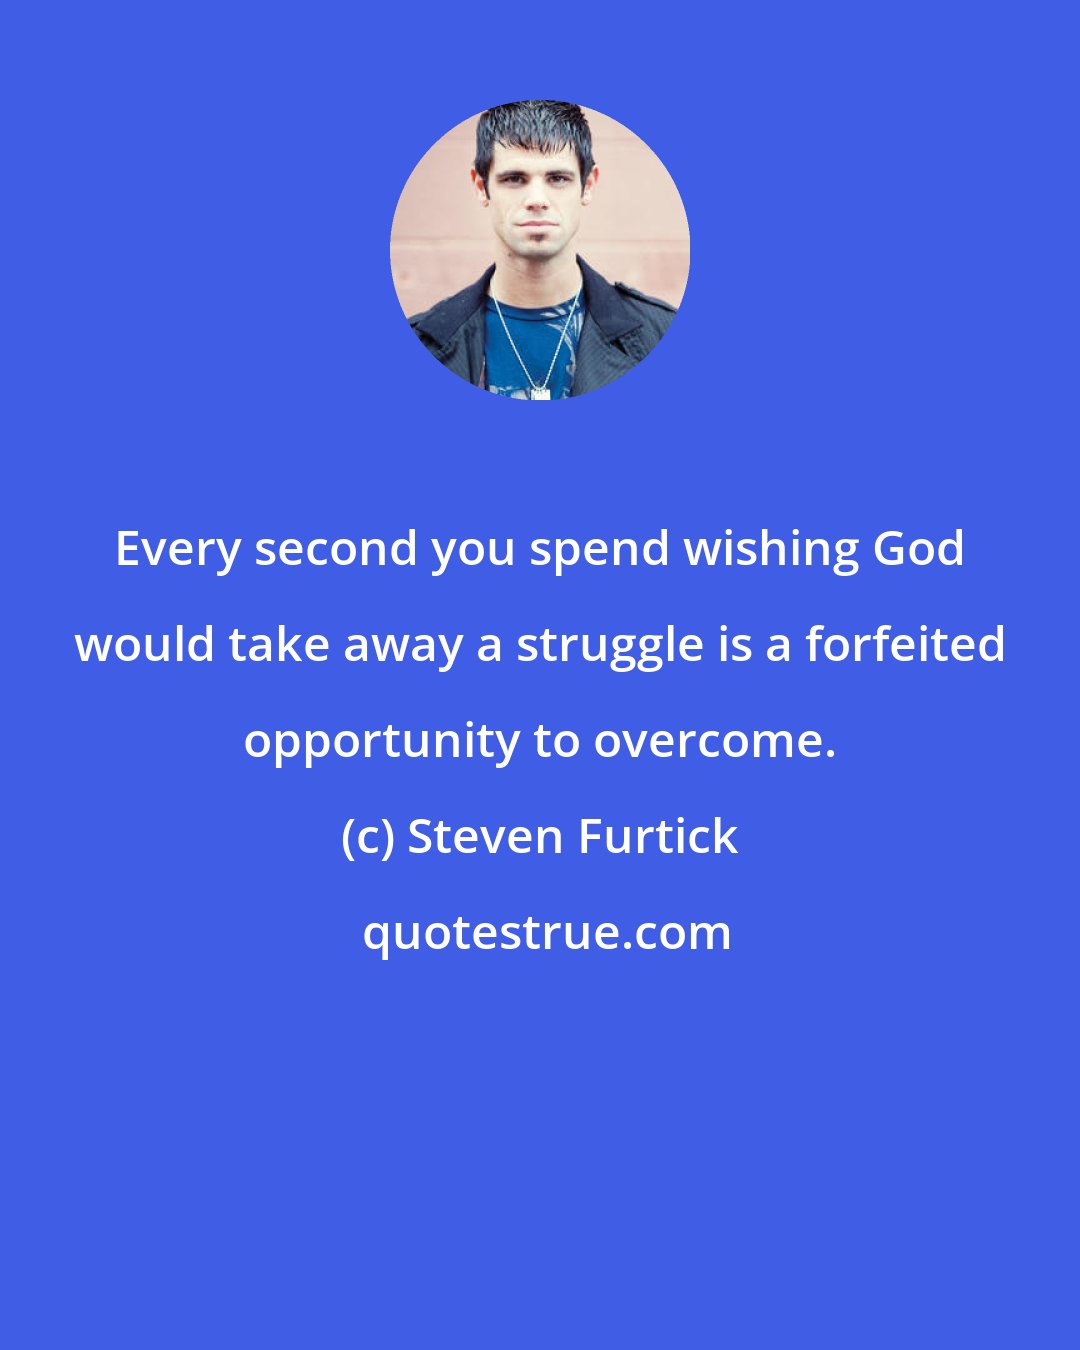 Steven Furtick: Every second you spend wishing God would take away a struggle is a forfeited opportunity to overcome.